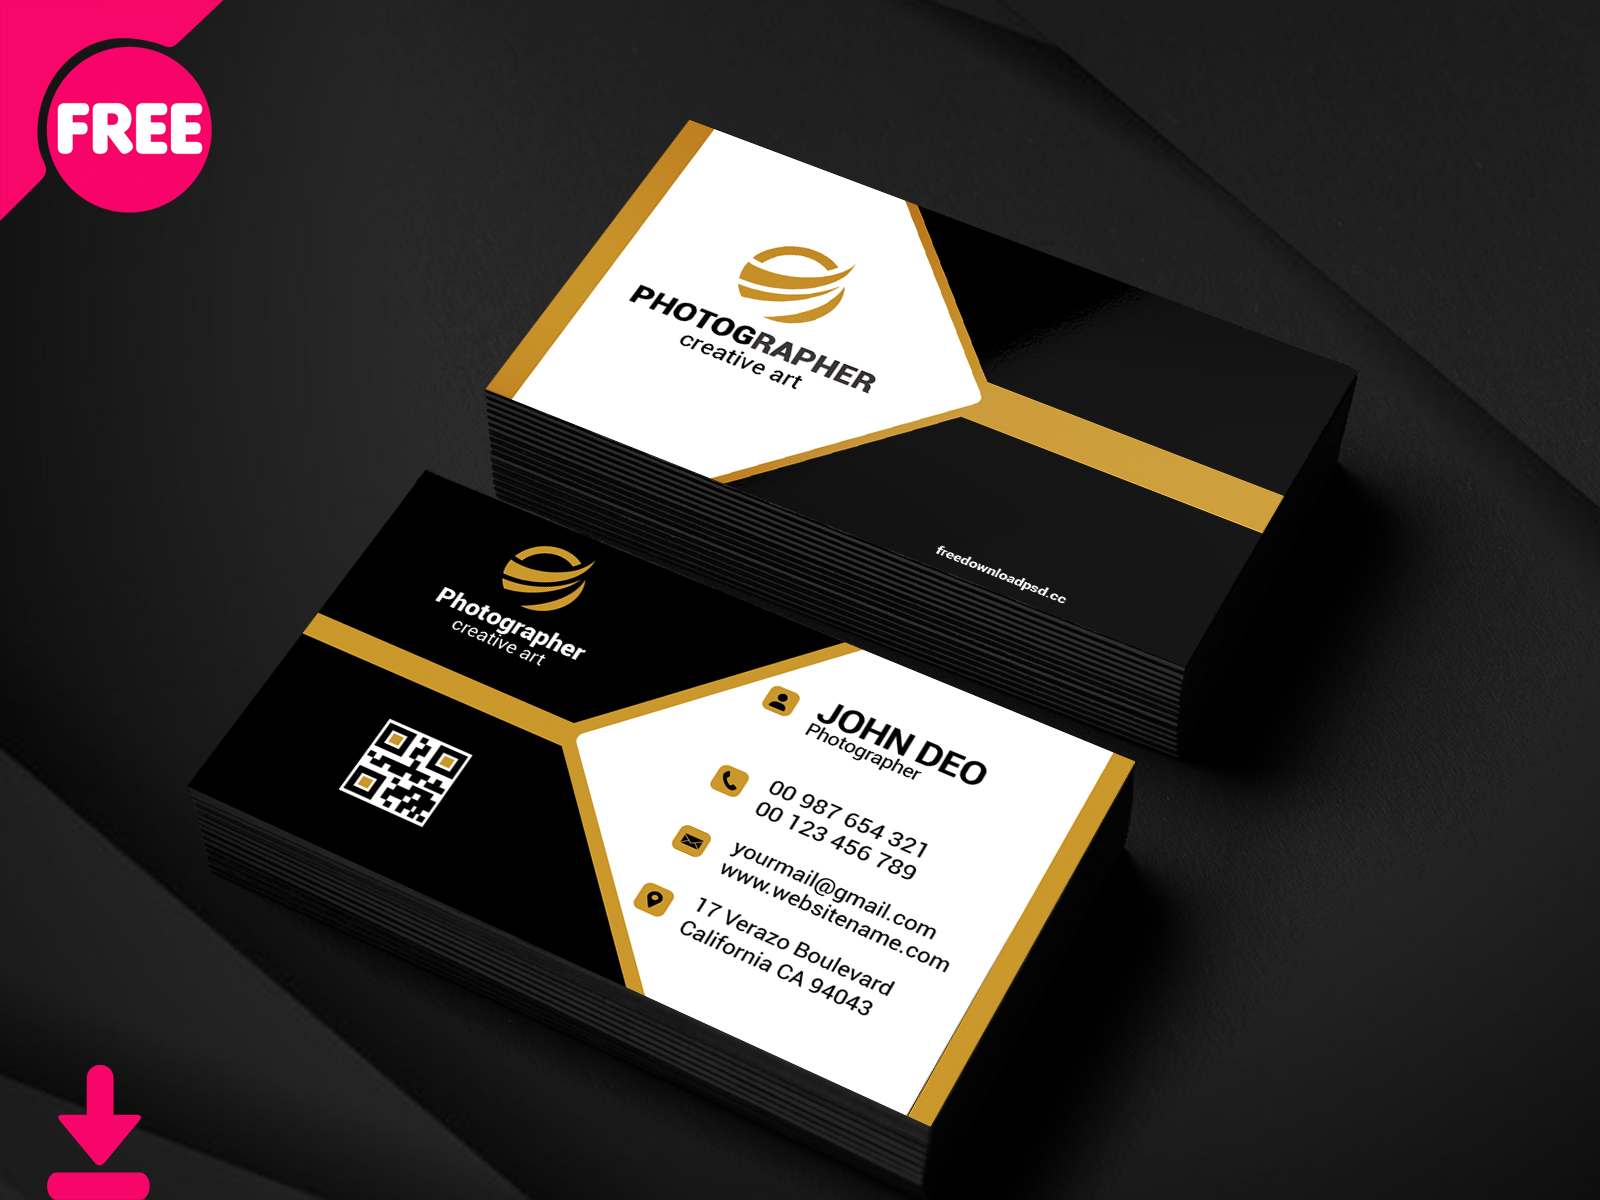 Free Sample Photography Business Card Psd Template Cover by Sheikh With Visiting Card Psd Template